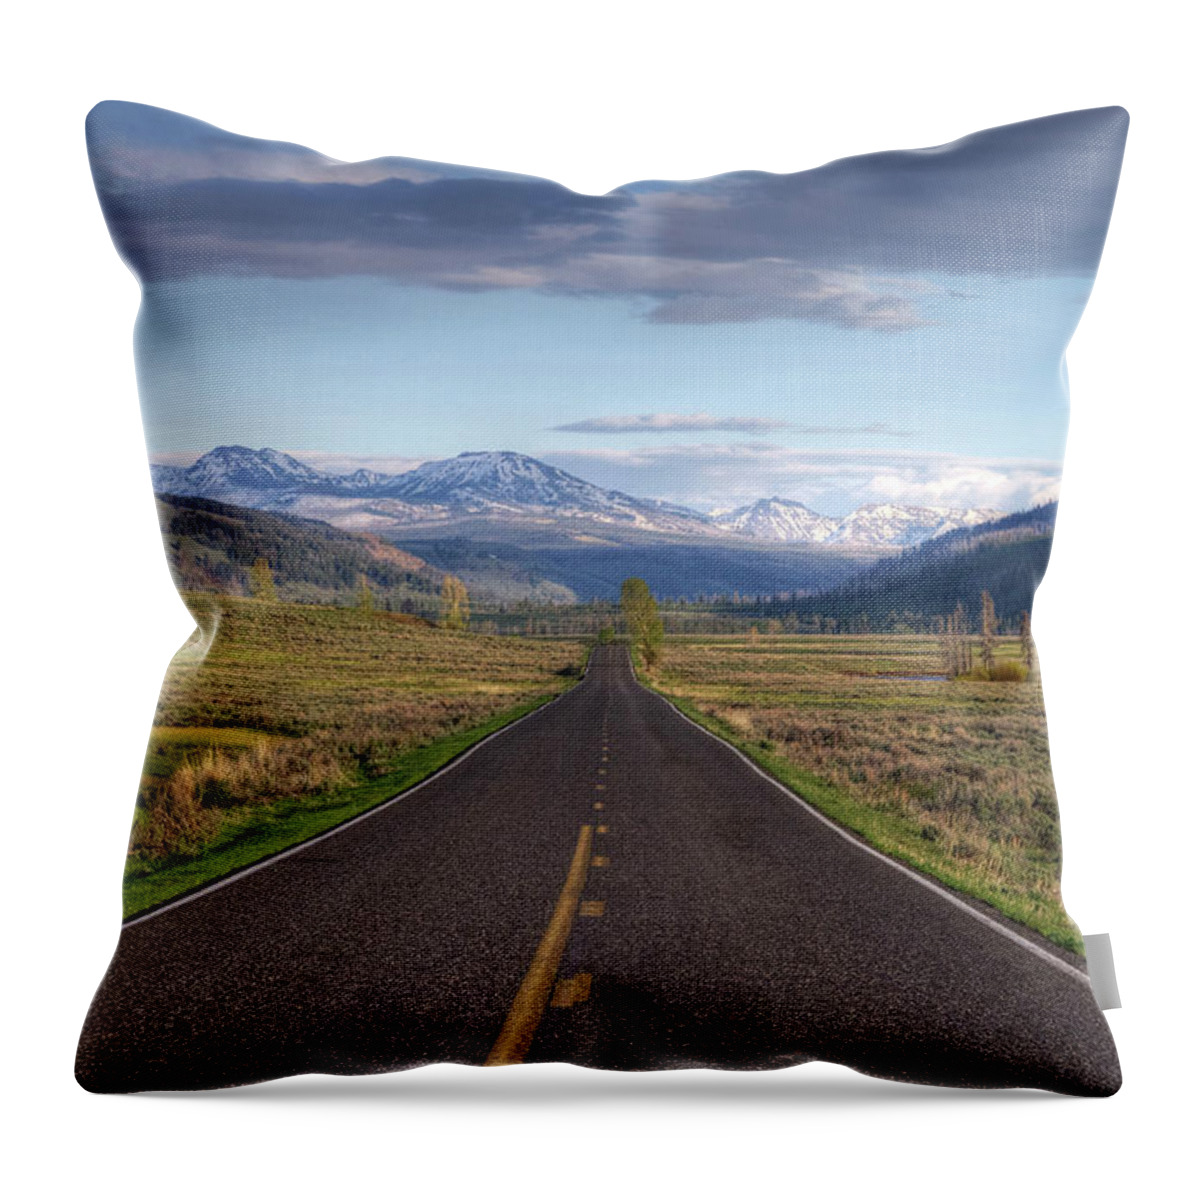 Grass Throw Pillow featuring the photograph Mountain Road by Dbushue Photography